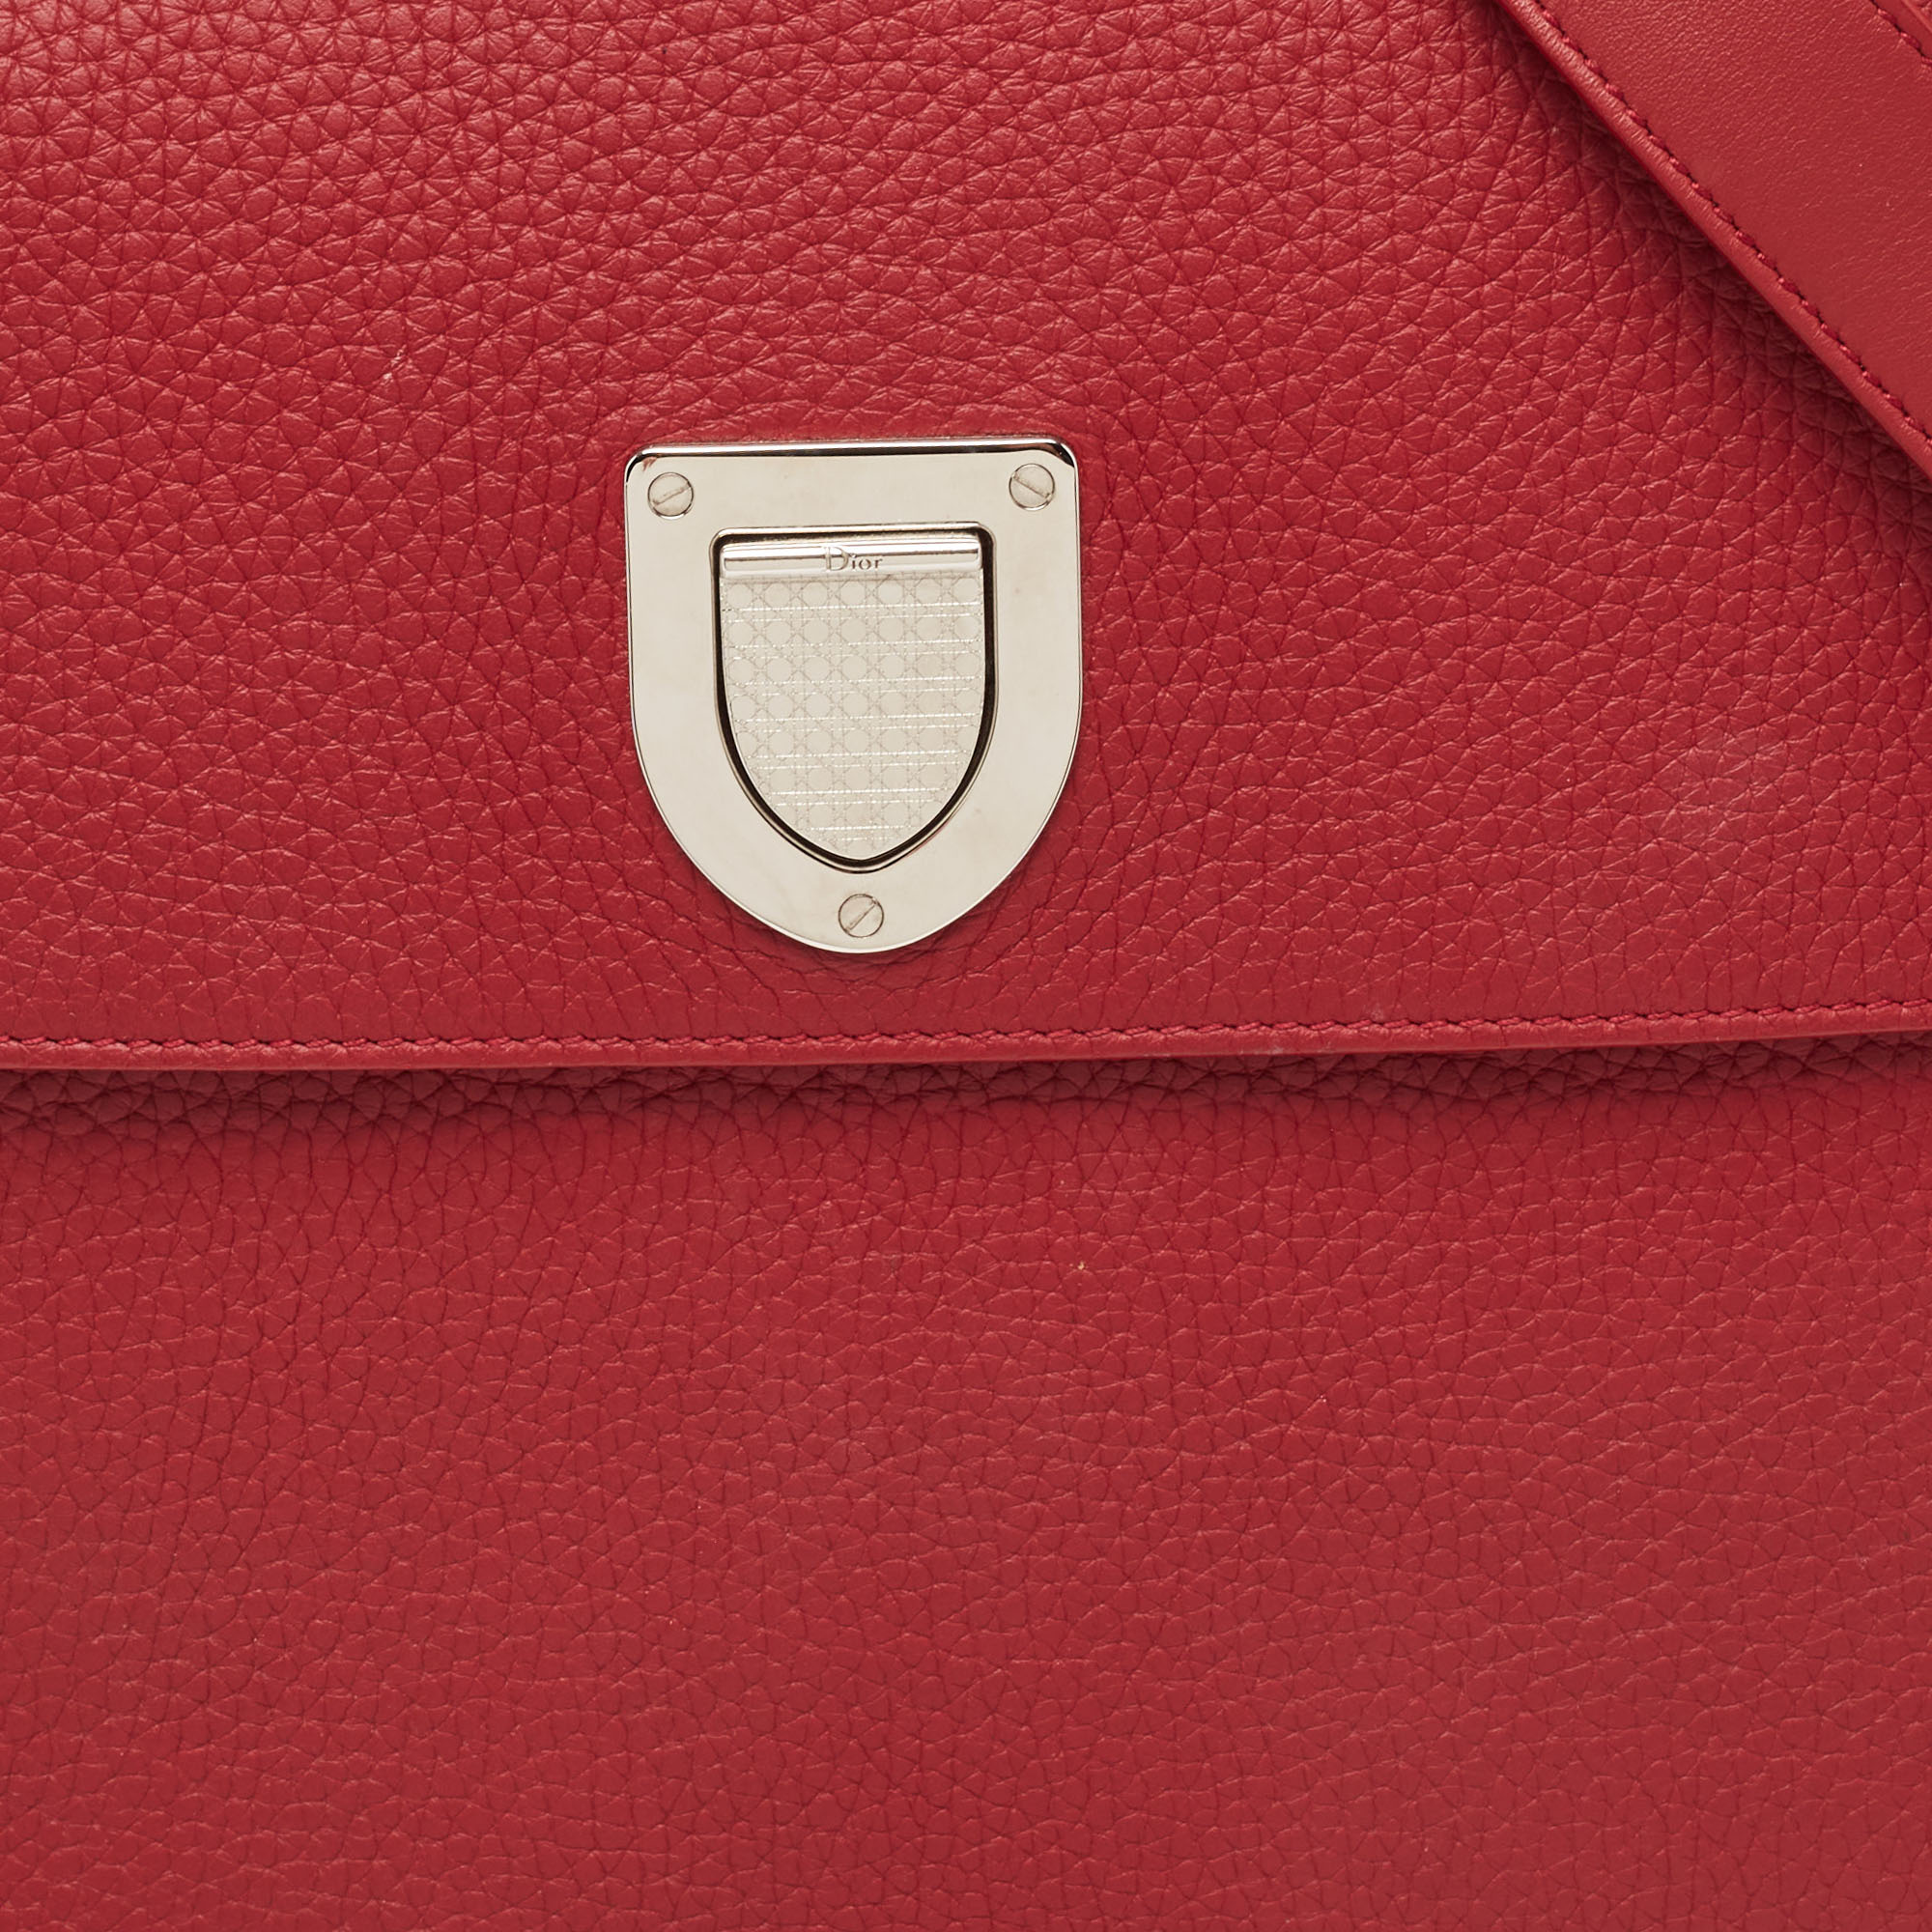 Dior Red Leather Large Diorever Top Handle Bag